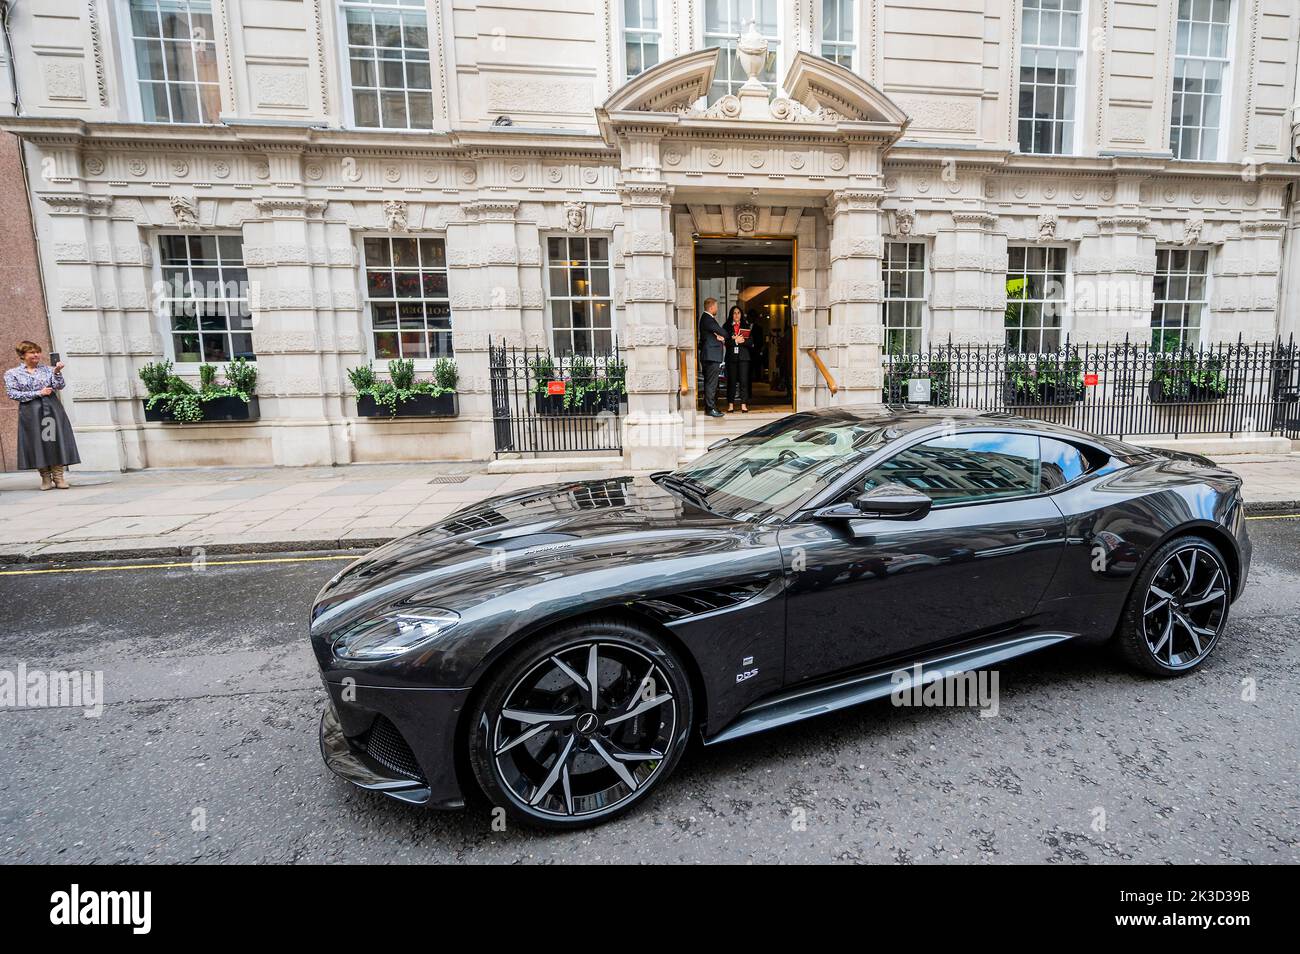 London, UK. 26 Sep 2022. No Time To Die vehicles including an Aston Martin DBS Superleggera sold to benefit The Royal Foundation of The Duke and Duchess of Cambridge (estimate: £300,000-400,000) - To mark the 60th anniversary of the James Bond films, Christie's and EON Productions are holding a charity sale, Sixty Years of James Bond including a total of 60 lots. The live sale (28th Sept) comprises vehicles, watches, costumes and props associated with the 25th film No Time To Die six lots offered celebrating each of the six James Bonds. Credit: Guy Bell/Alamy Live News Stock Photo